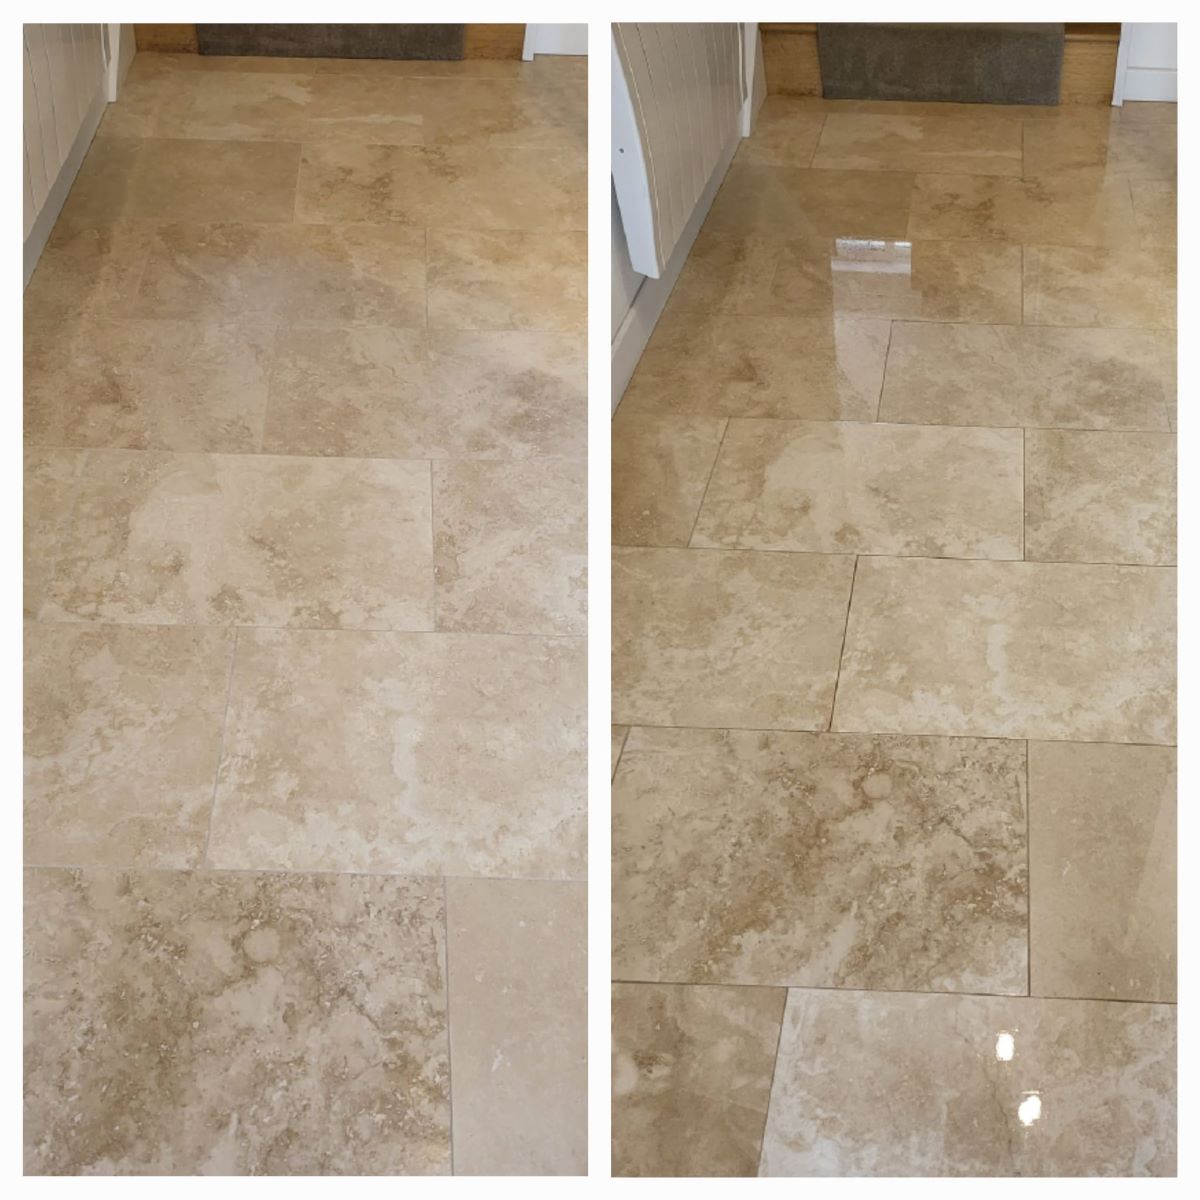 Domestic tiled floor before and after cleaning